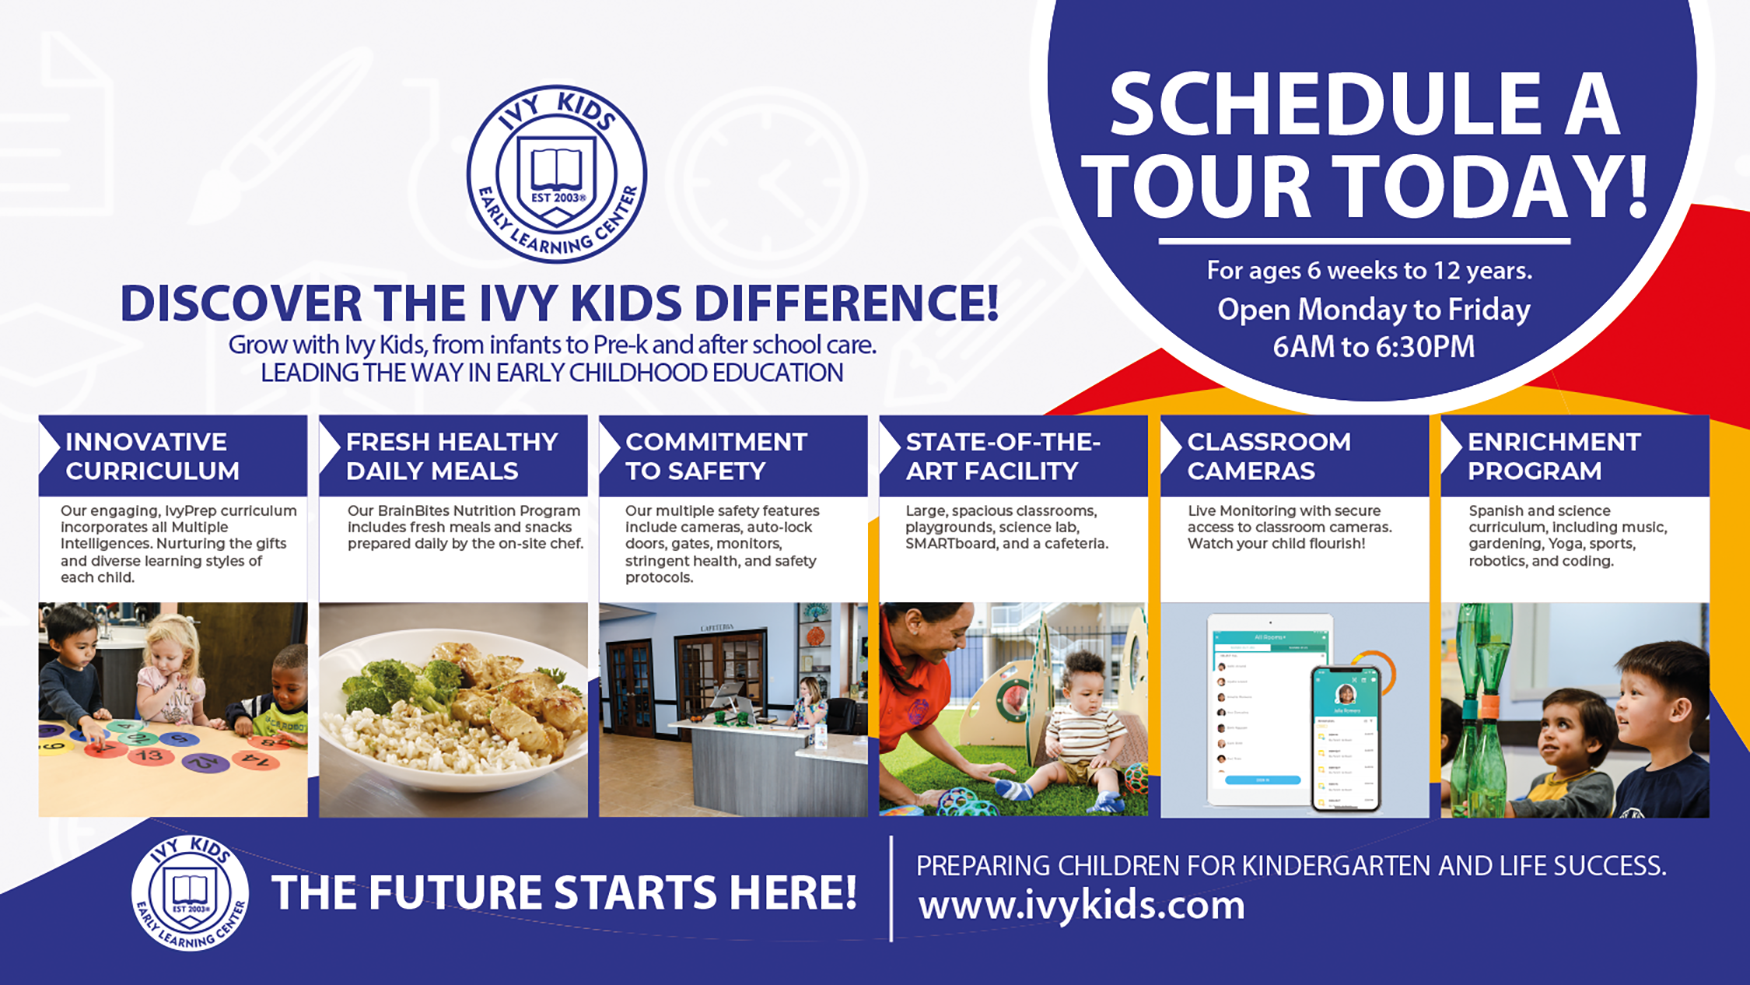 Ivy Kids Early Learning Center Offers Fresh Chef-Prepared Meals For Healthy Kids